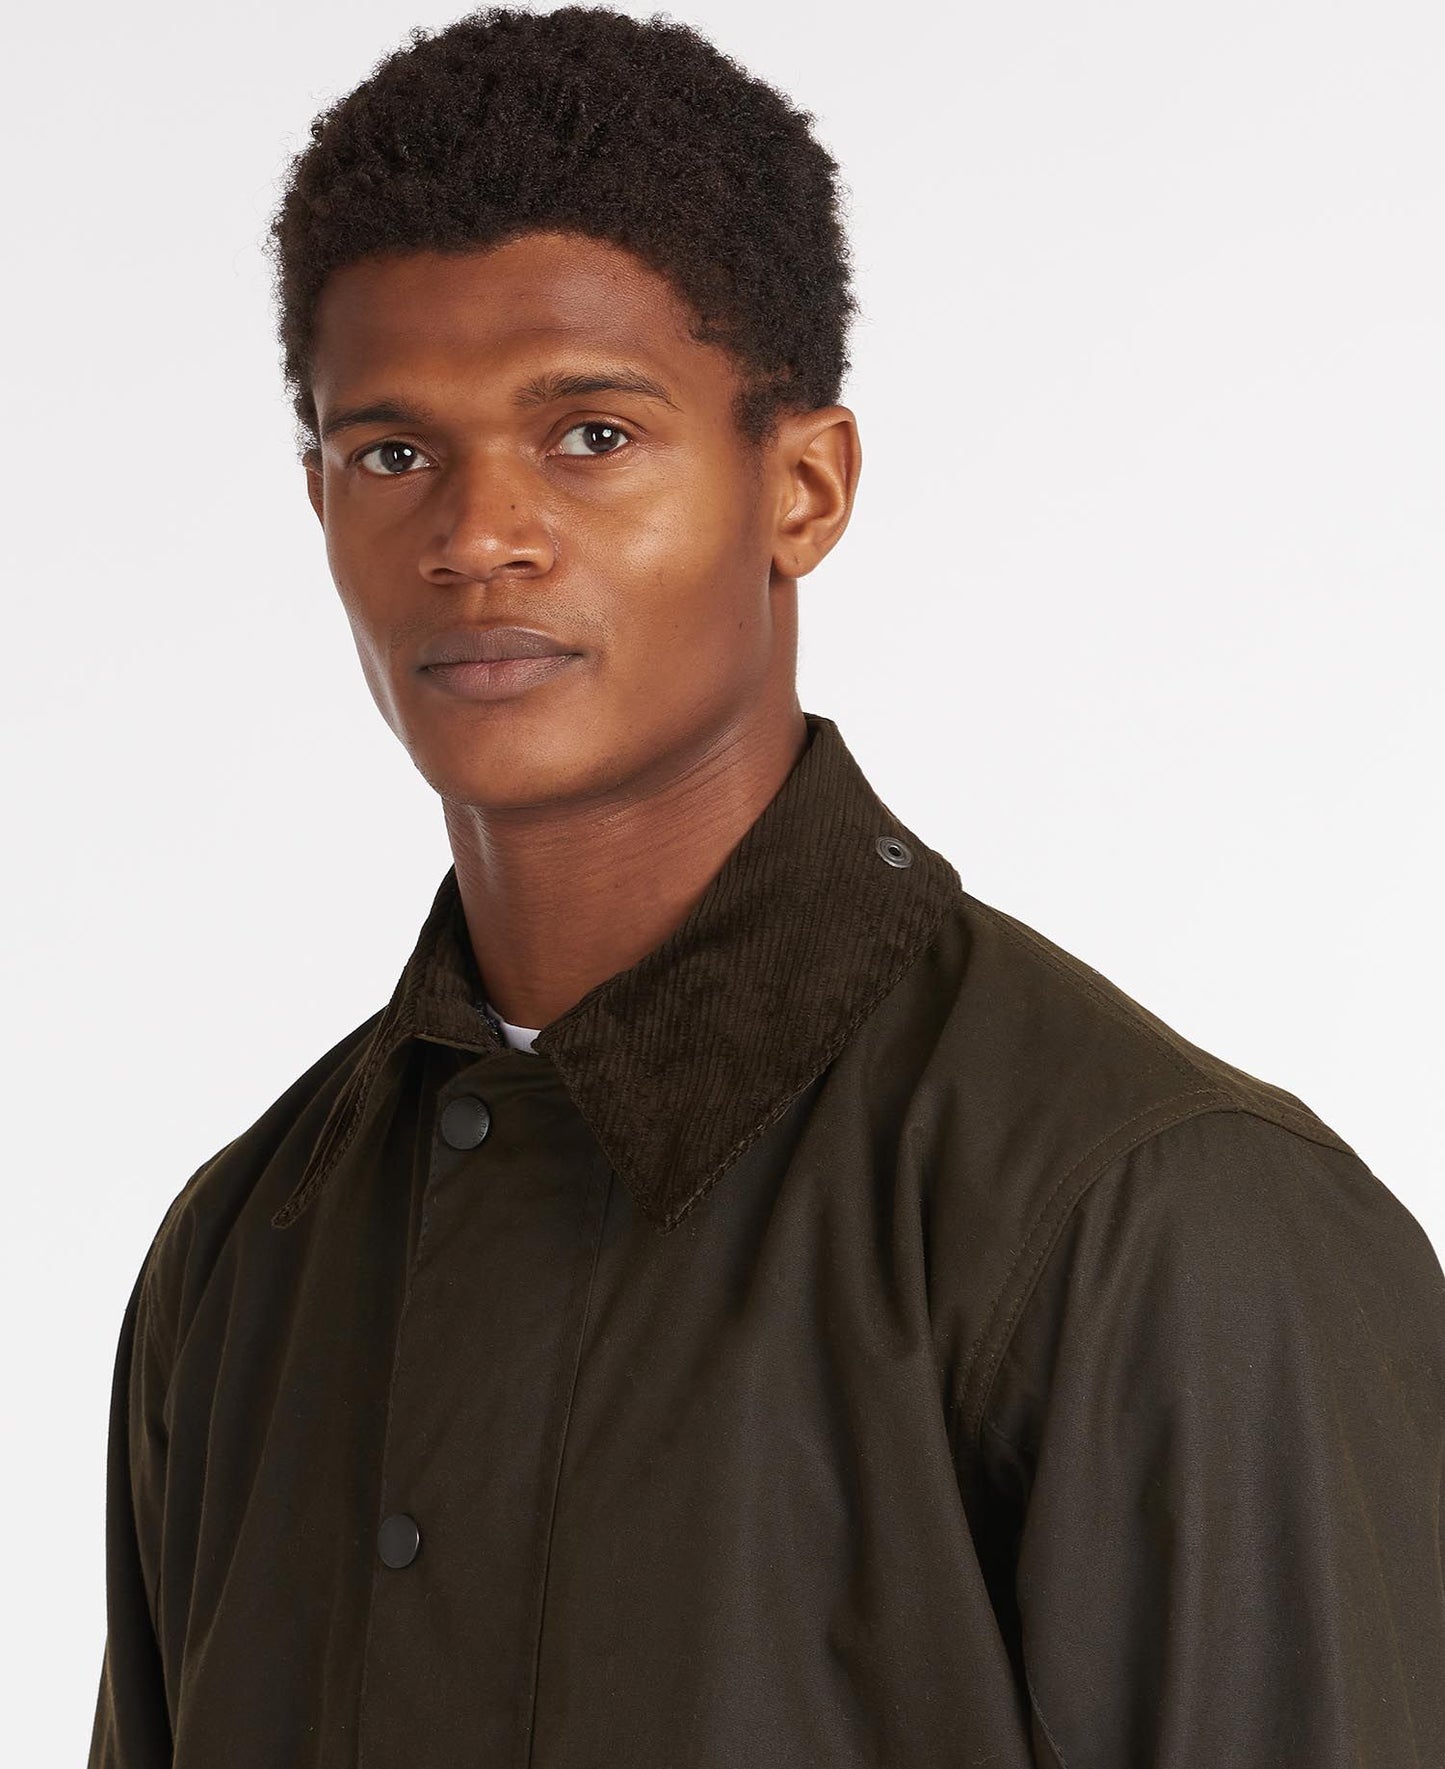 Barbour Classic Northumbria Waxed Jacket